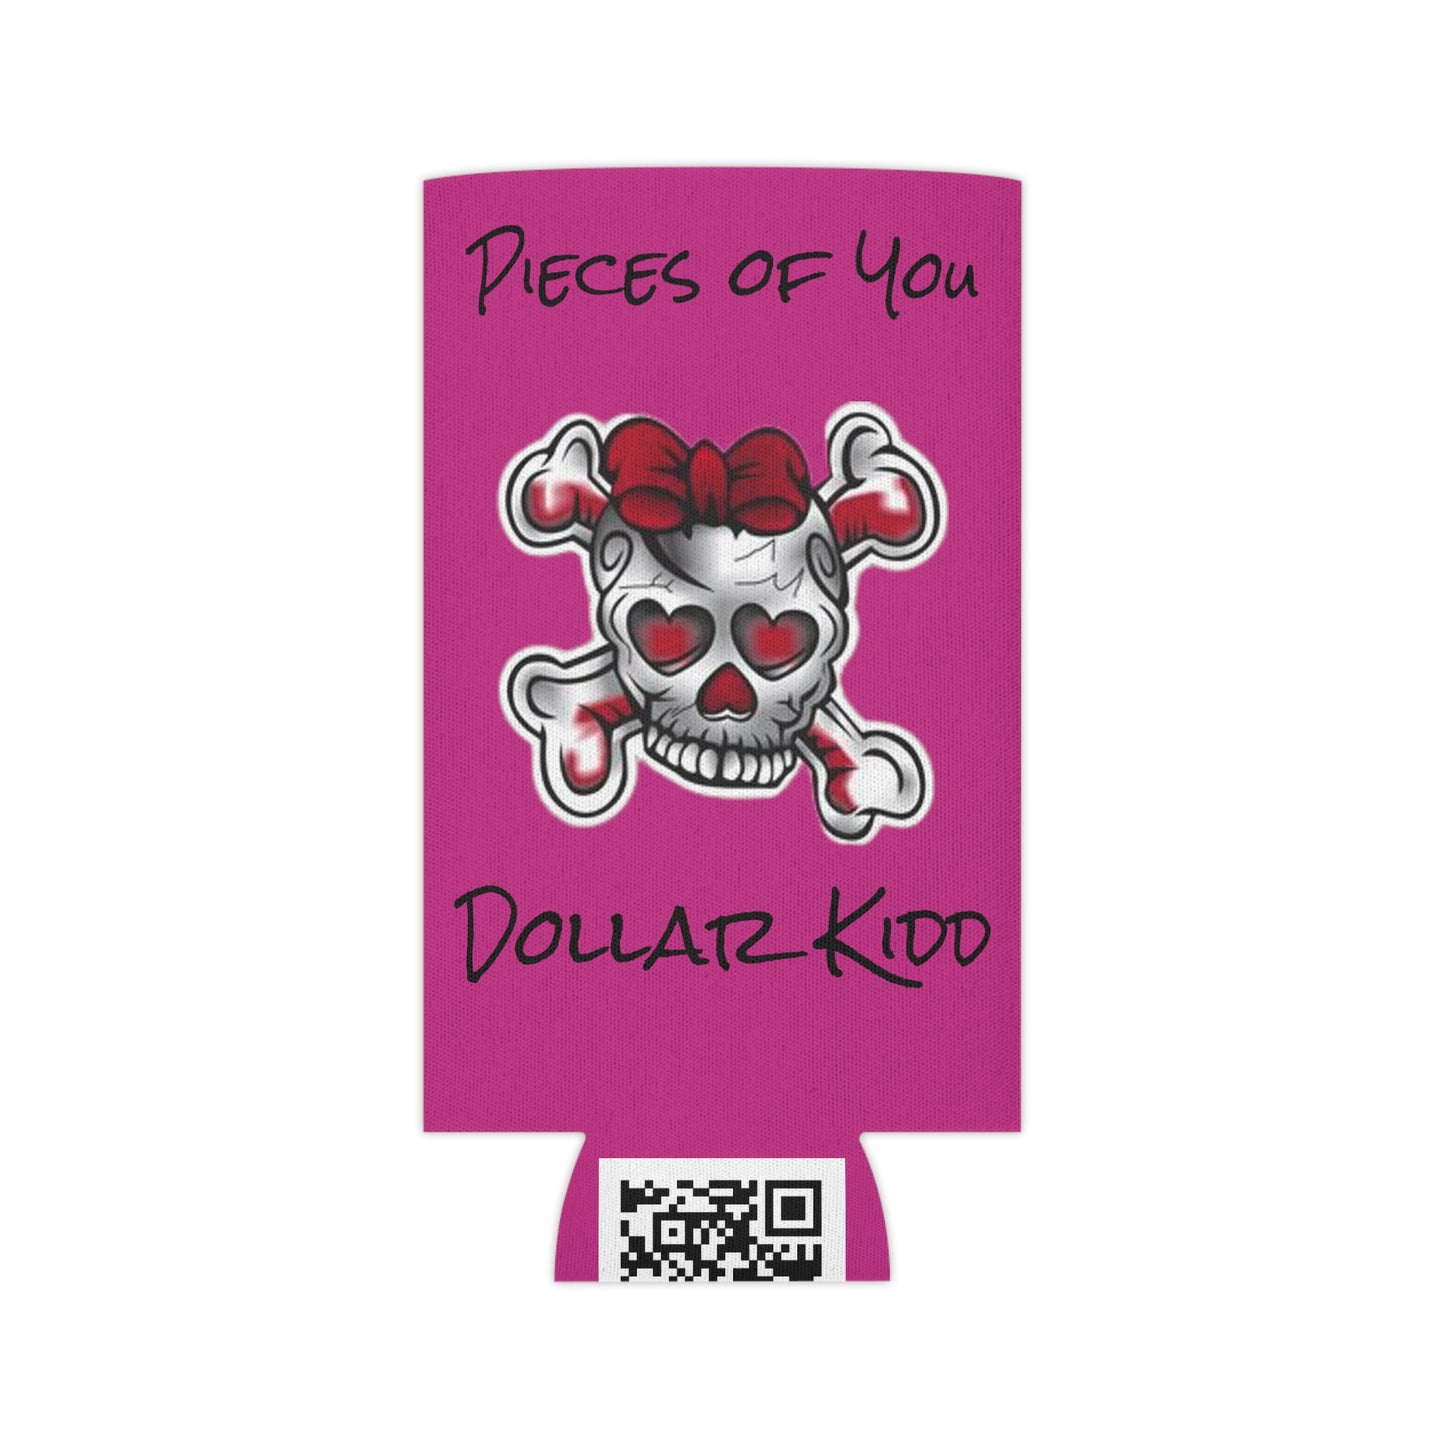 Dollar Kidd - Pieces of you Soft Can Cooler